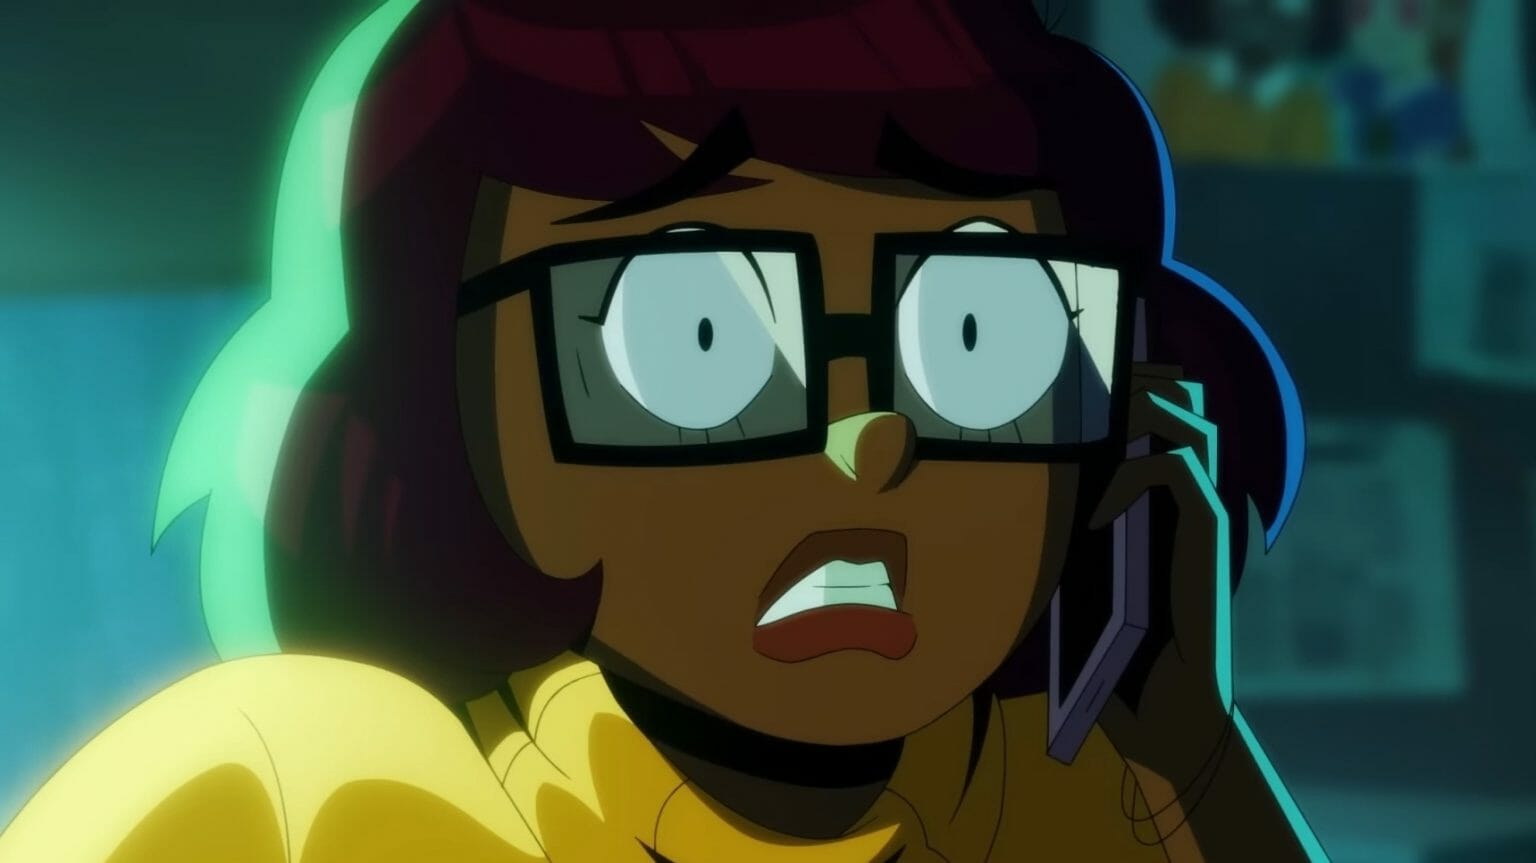 Velma Dinkley as voiced by Mindy Kaling shrieks in terror in the HBO Max animated origin story prequel series VELMA.